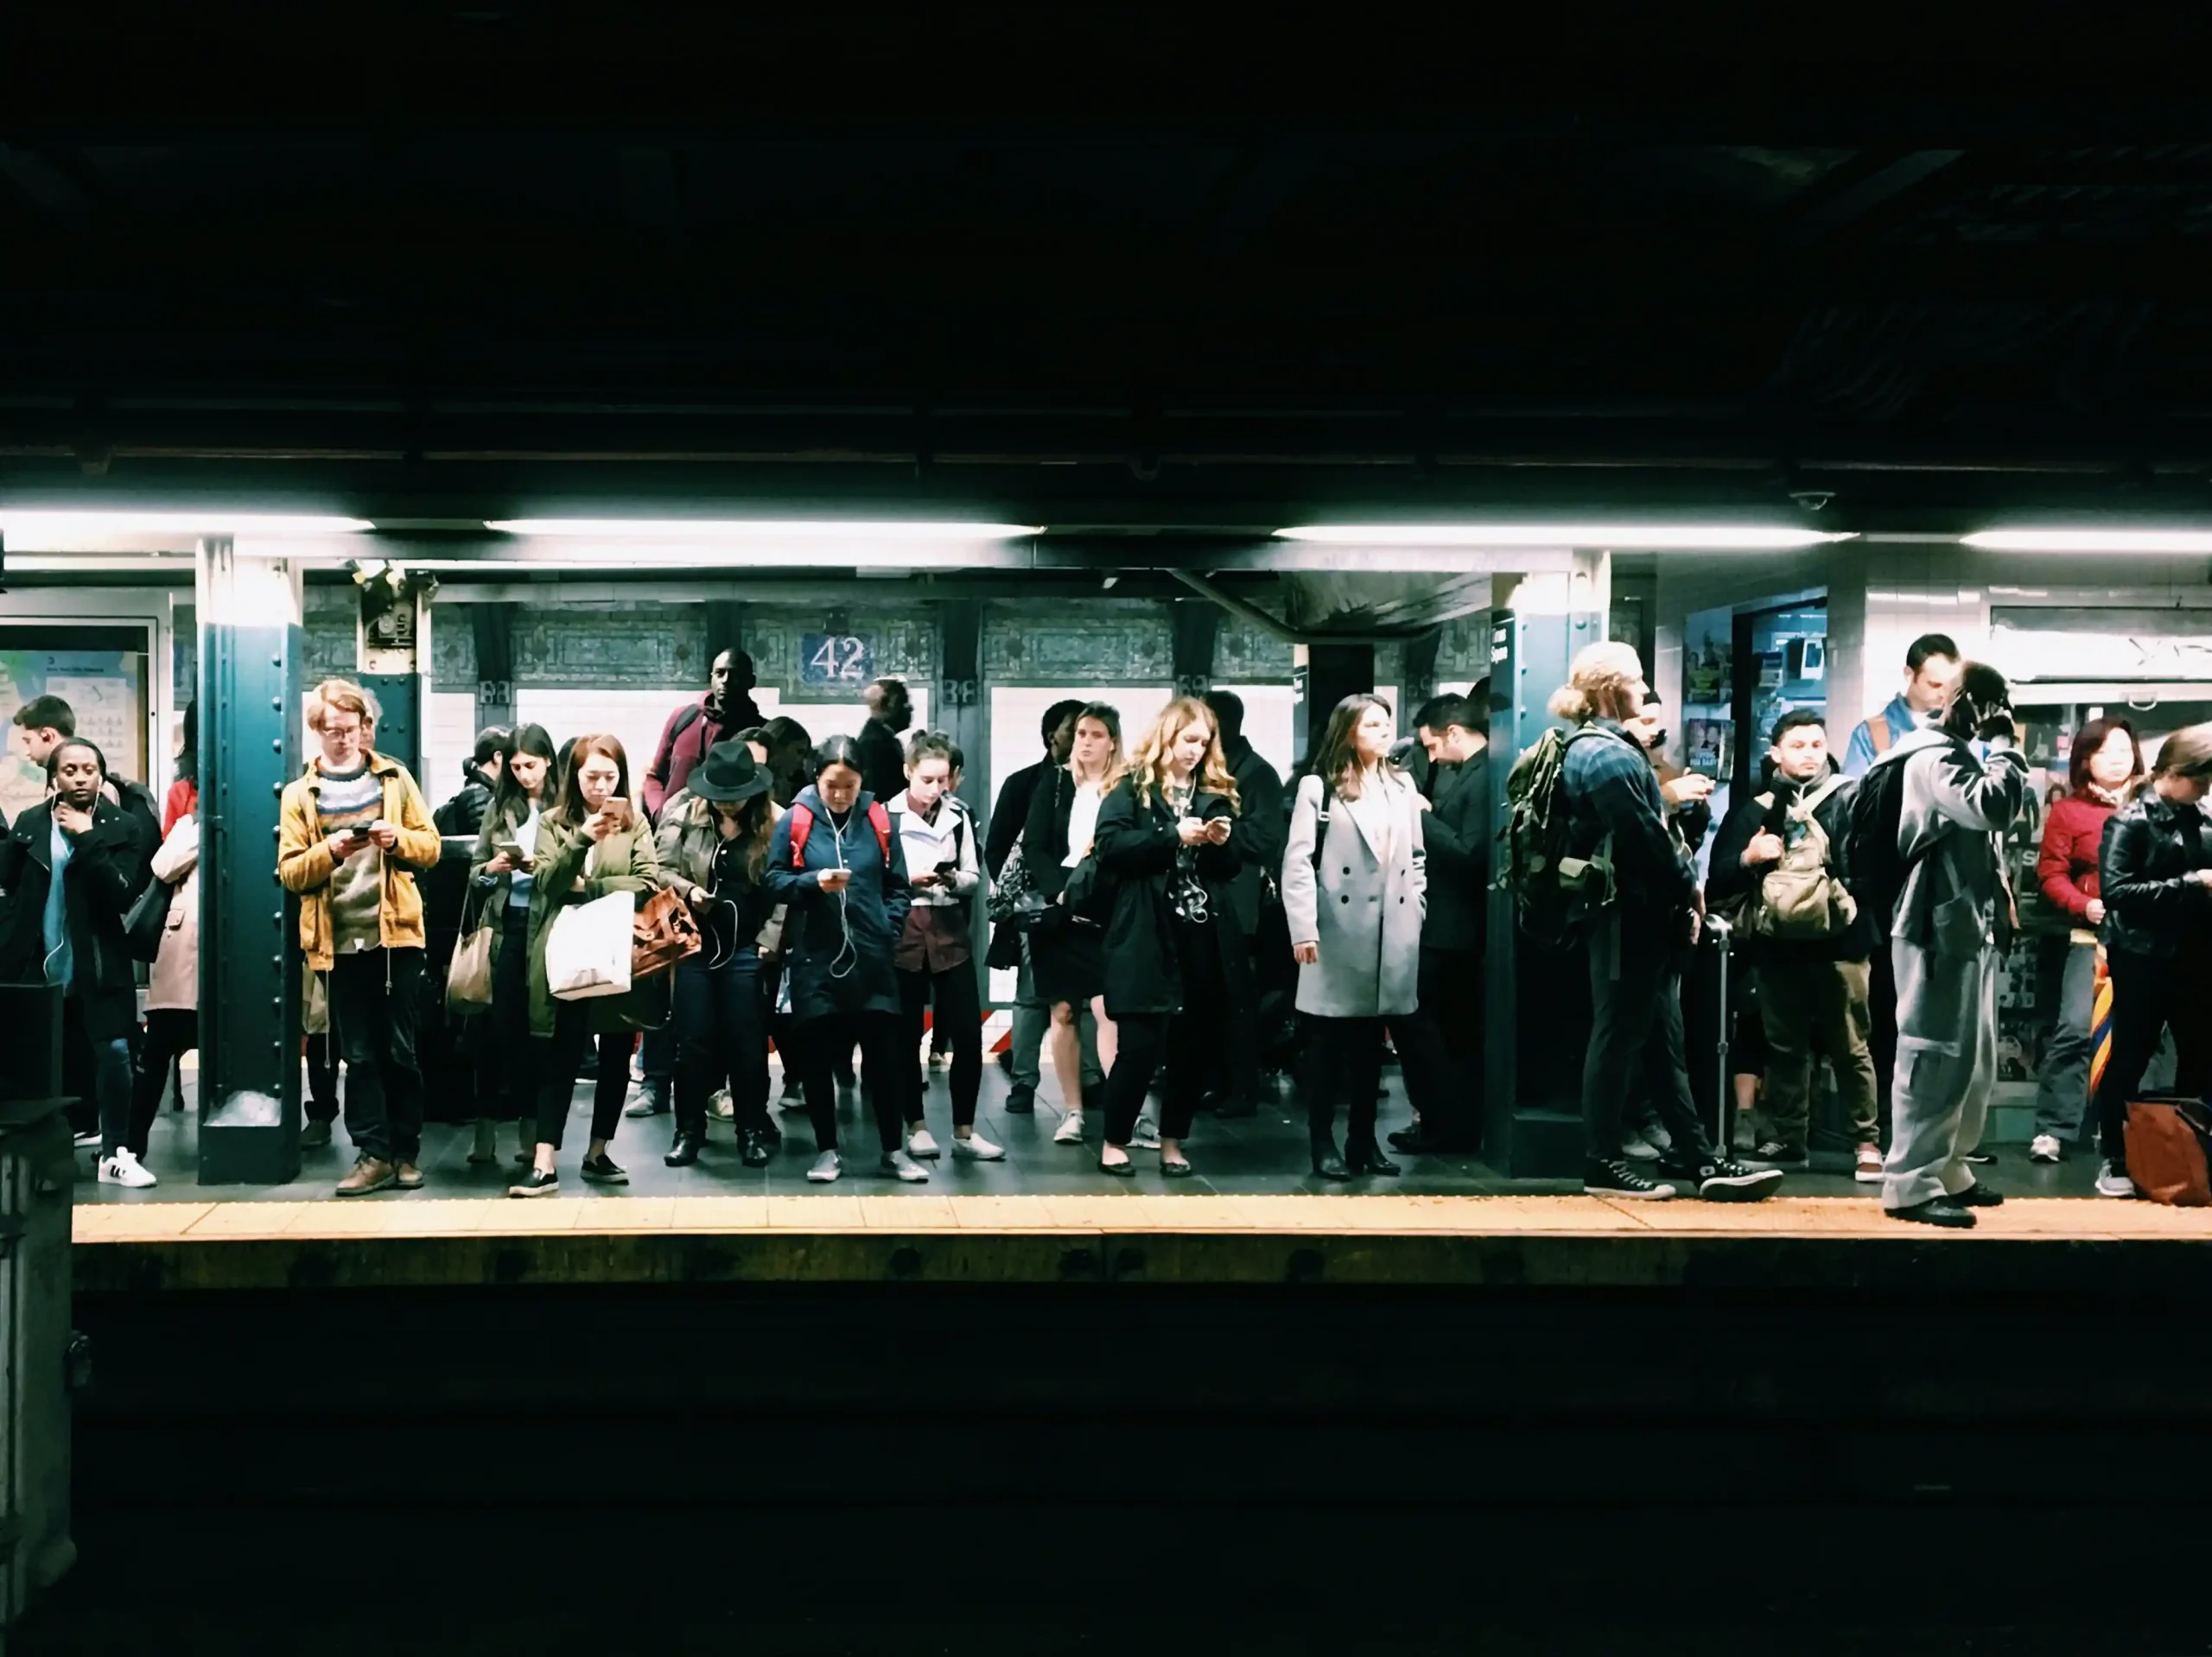 Big crowd in a subway station